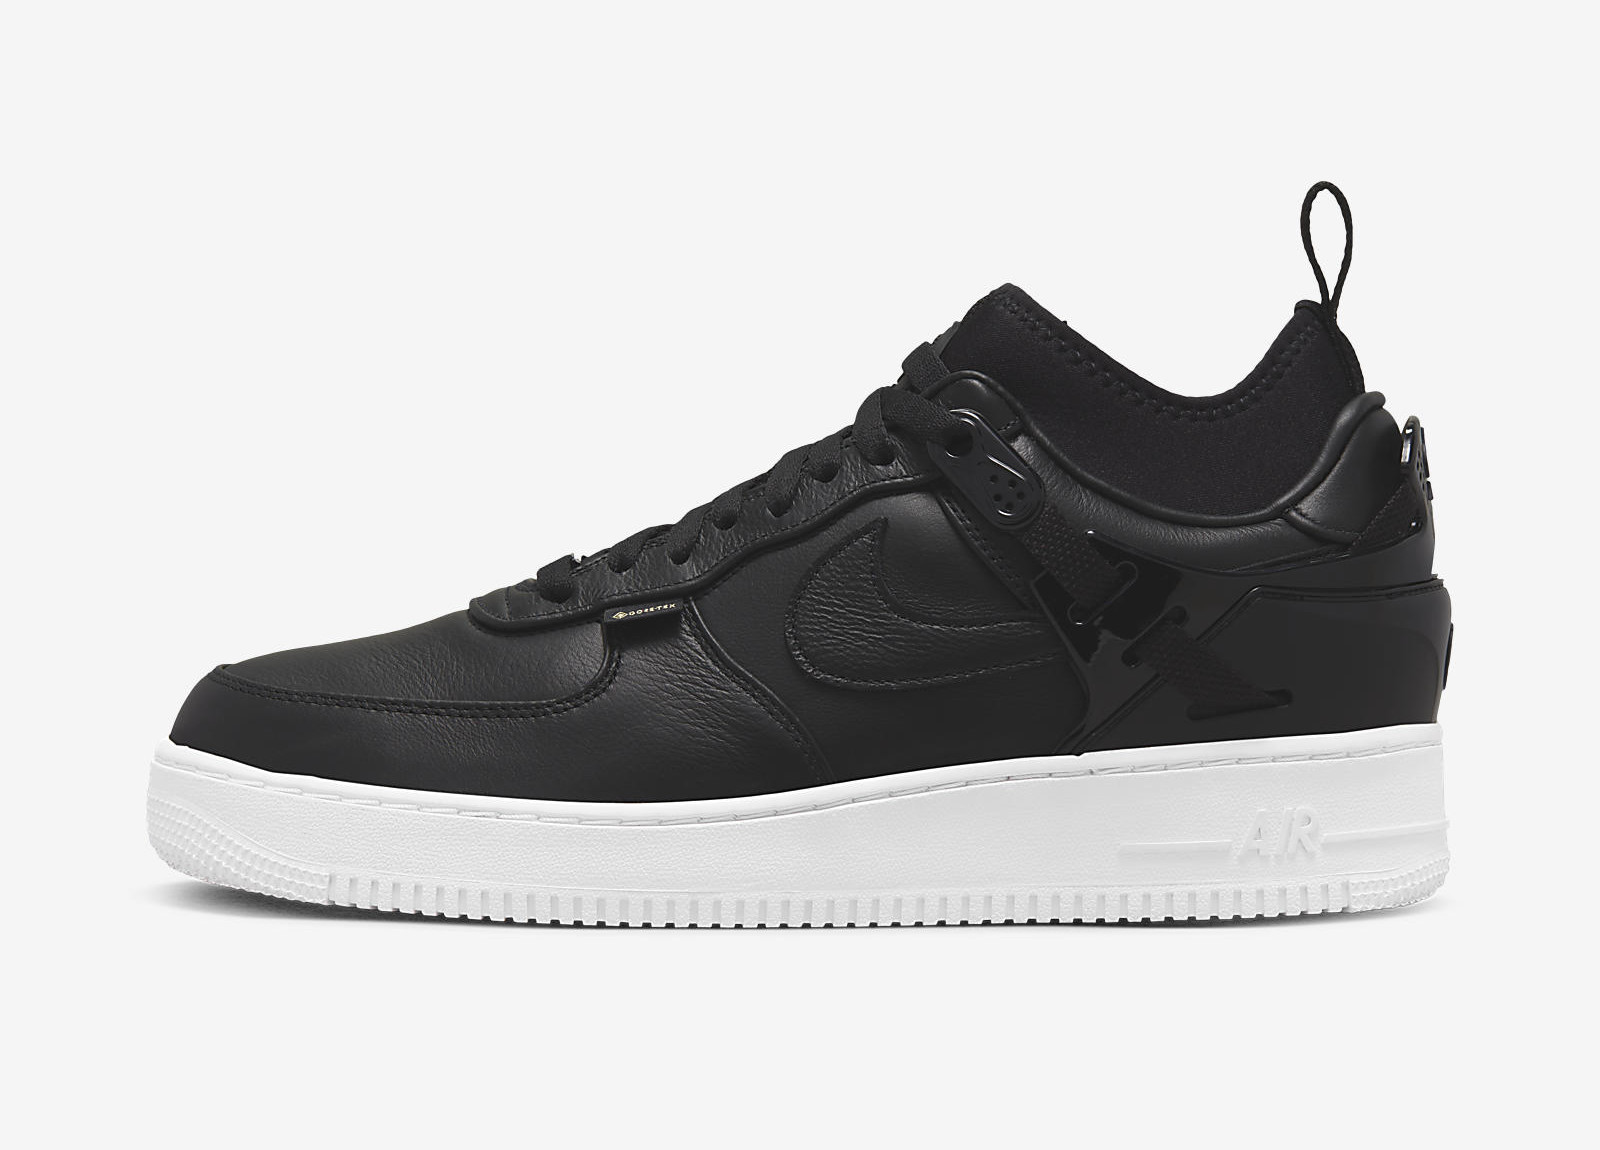 Undercover x Nike
Air Force 1 Low
« Black »